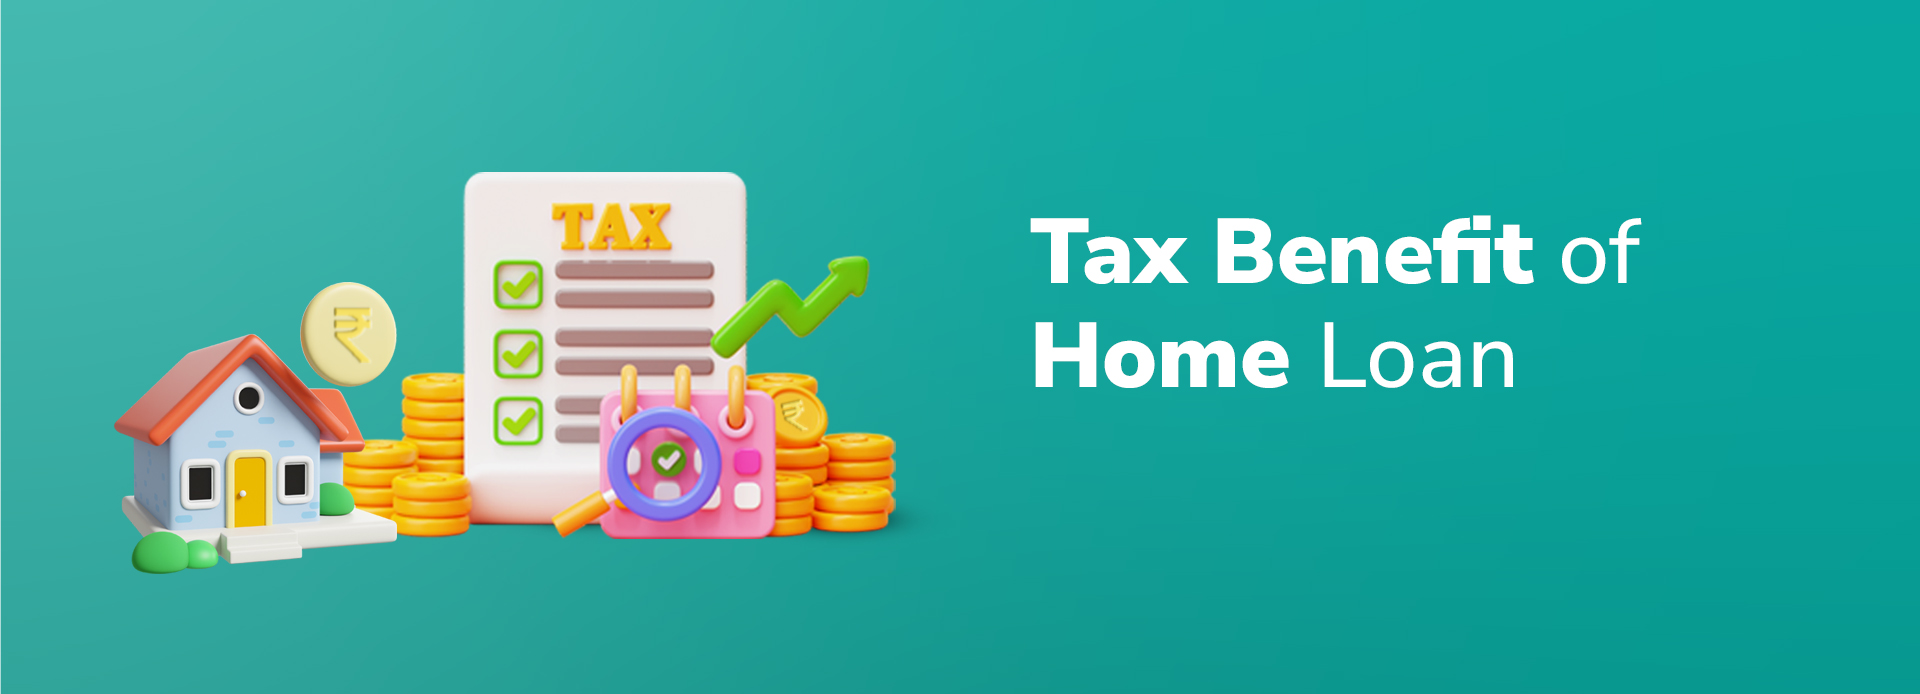 How to Leverage Your Home Loan for Tax Benefits?